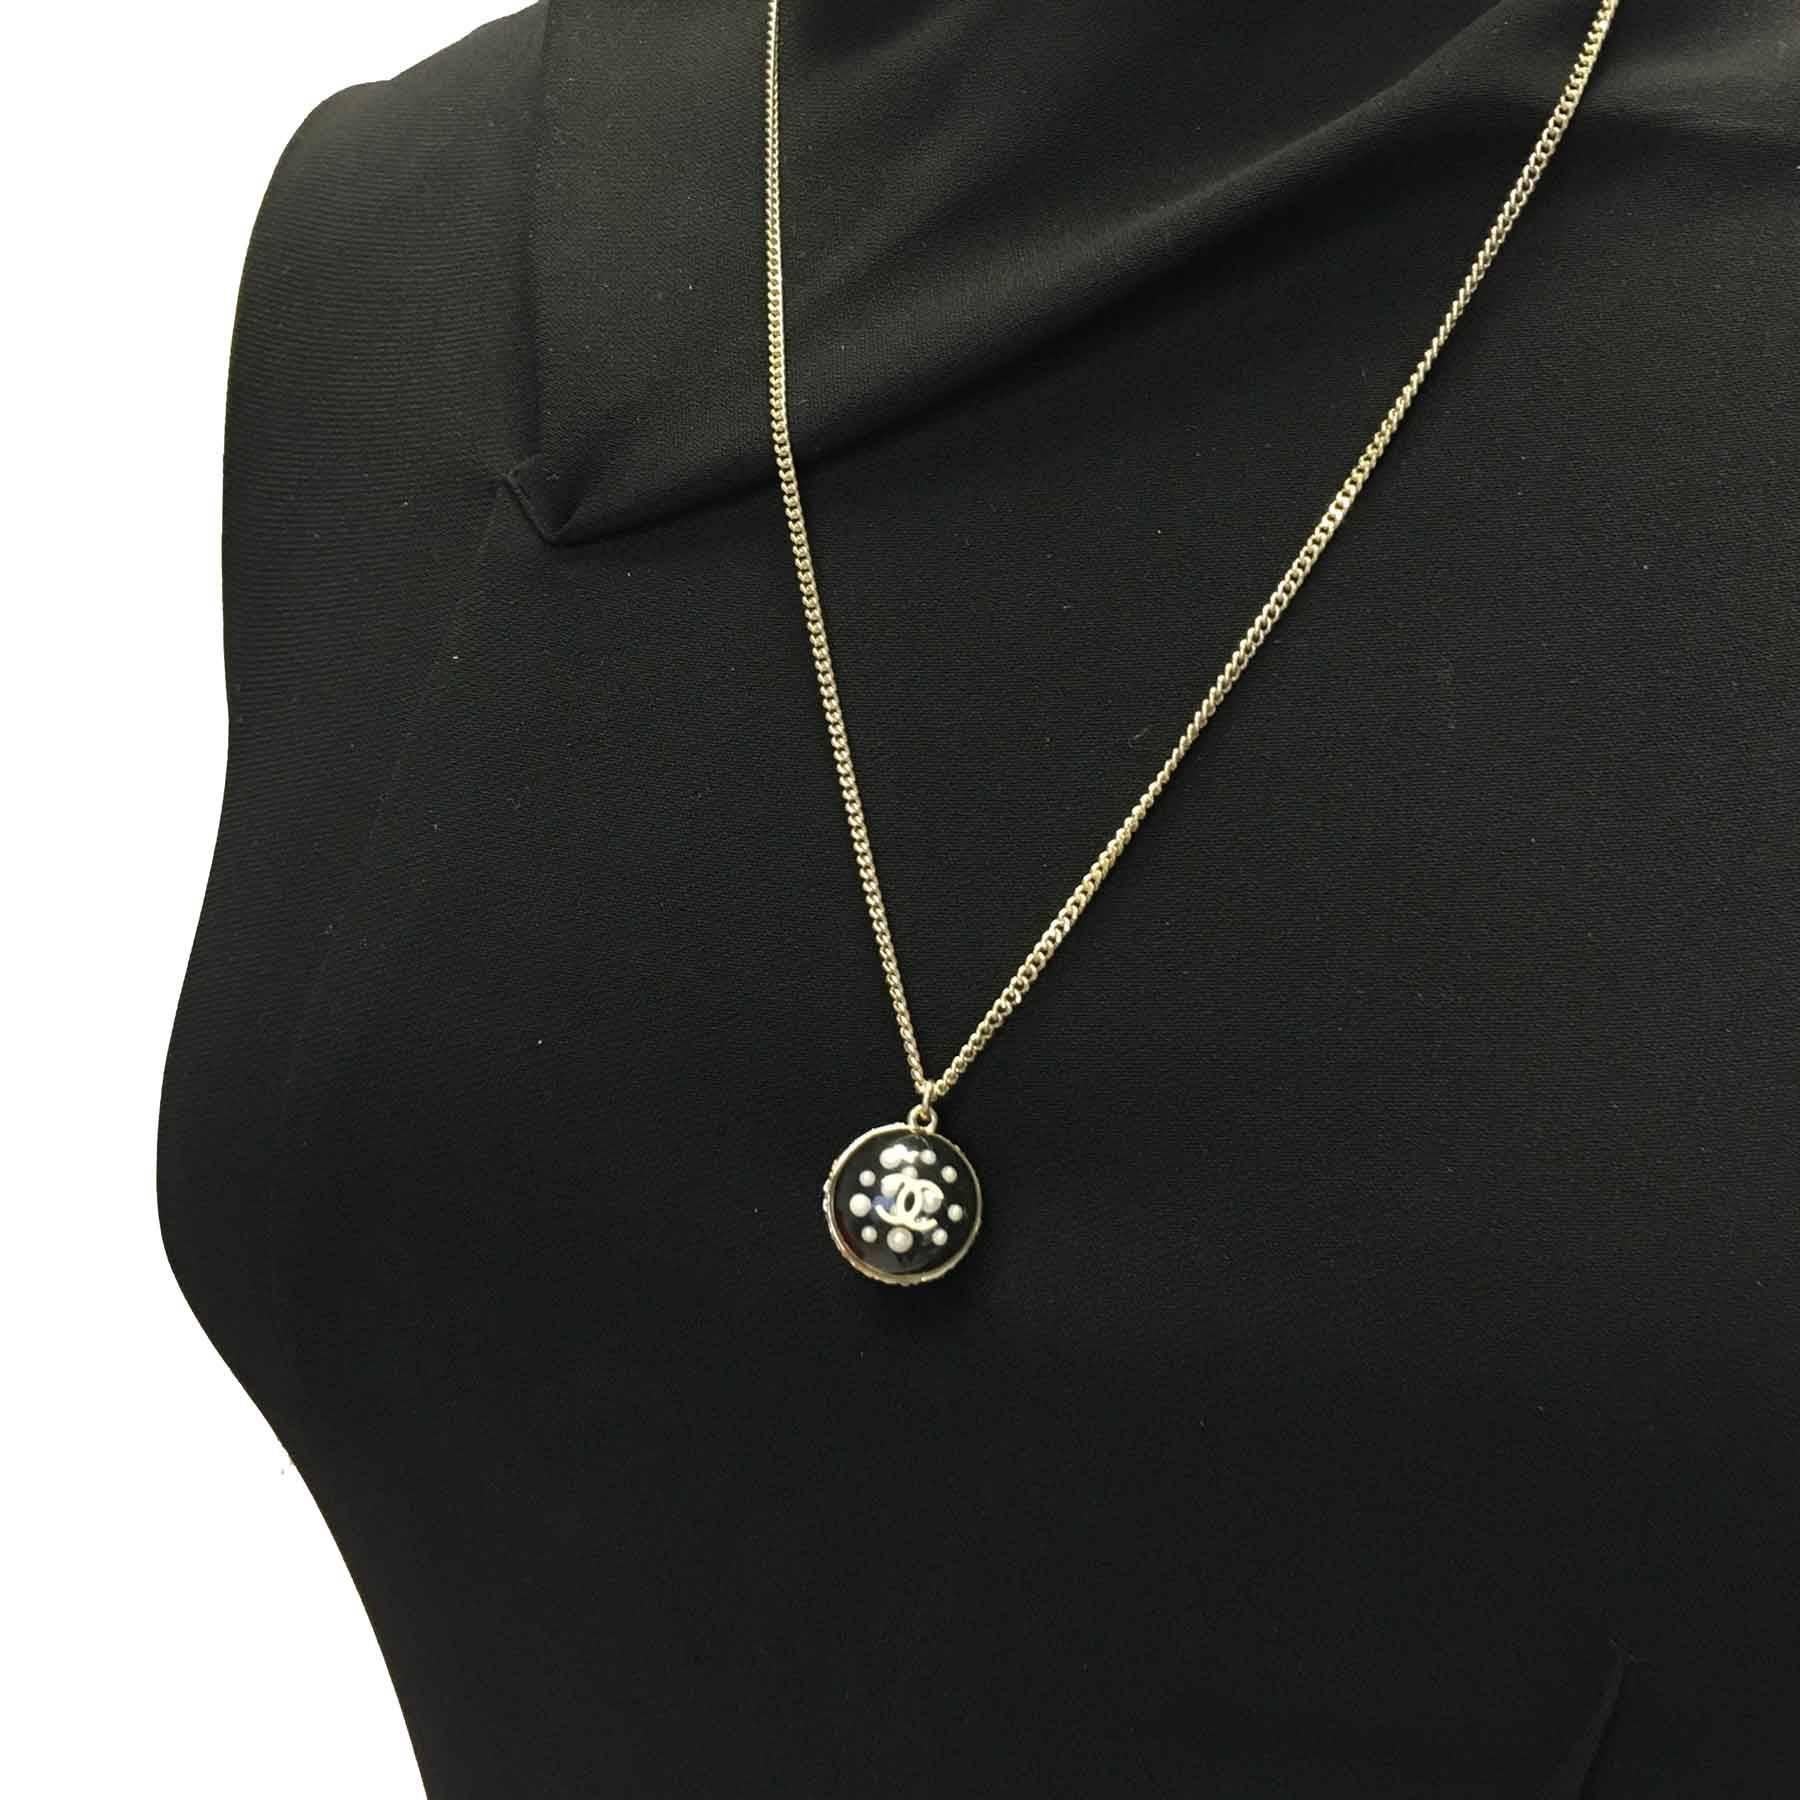 CHANEL Necklace in Gilded Metal and Ball Pendant with Inclusion of CC and Pearls 4